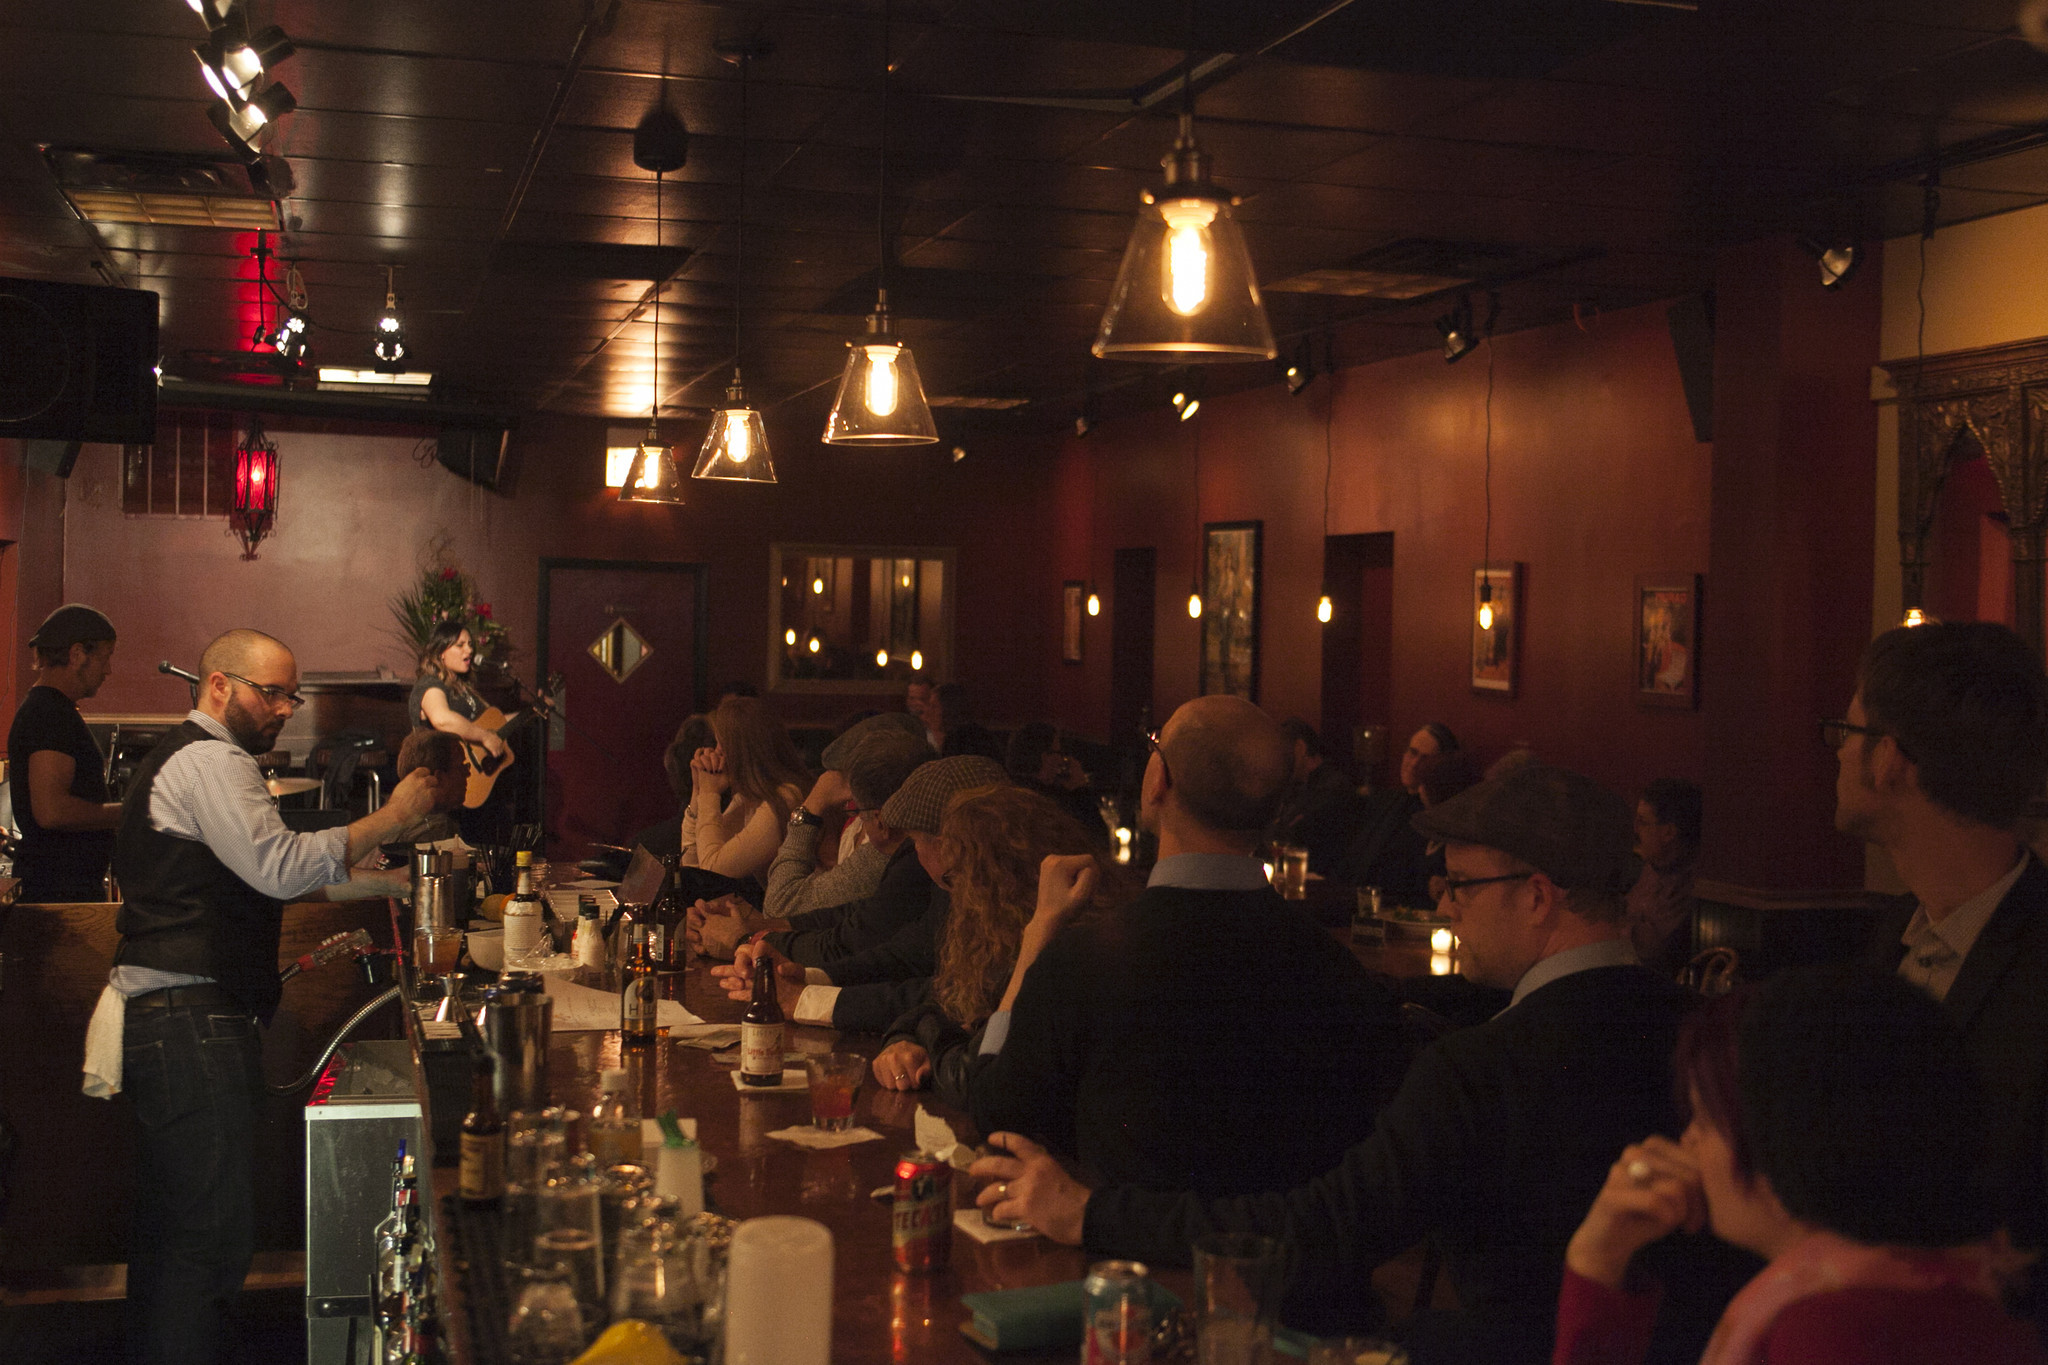 Patrons watch from the bar as Abbi Rajasekhar (cq) performs at High Hat Club's grand opening, Oct. 4, 2014.  (Kristan Lieb/For the Chicago Tribune)